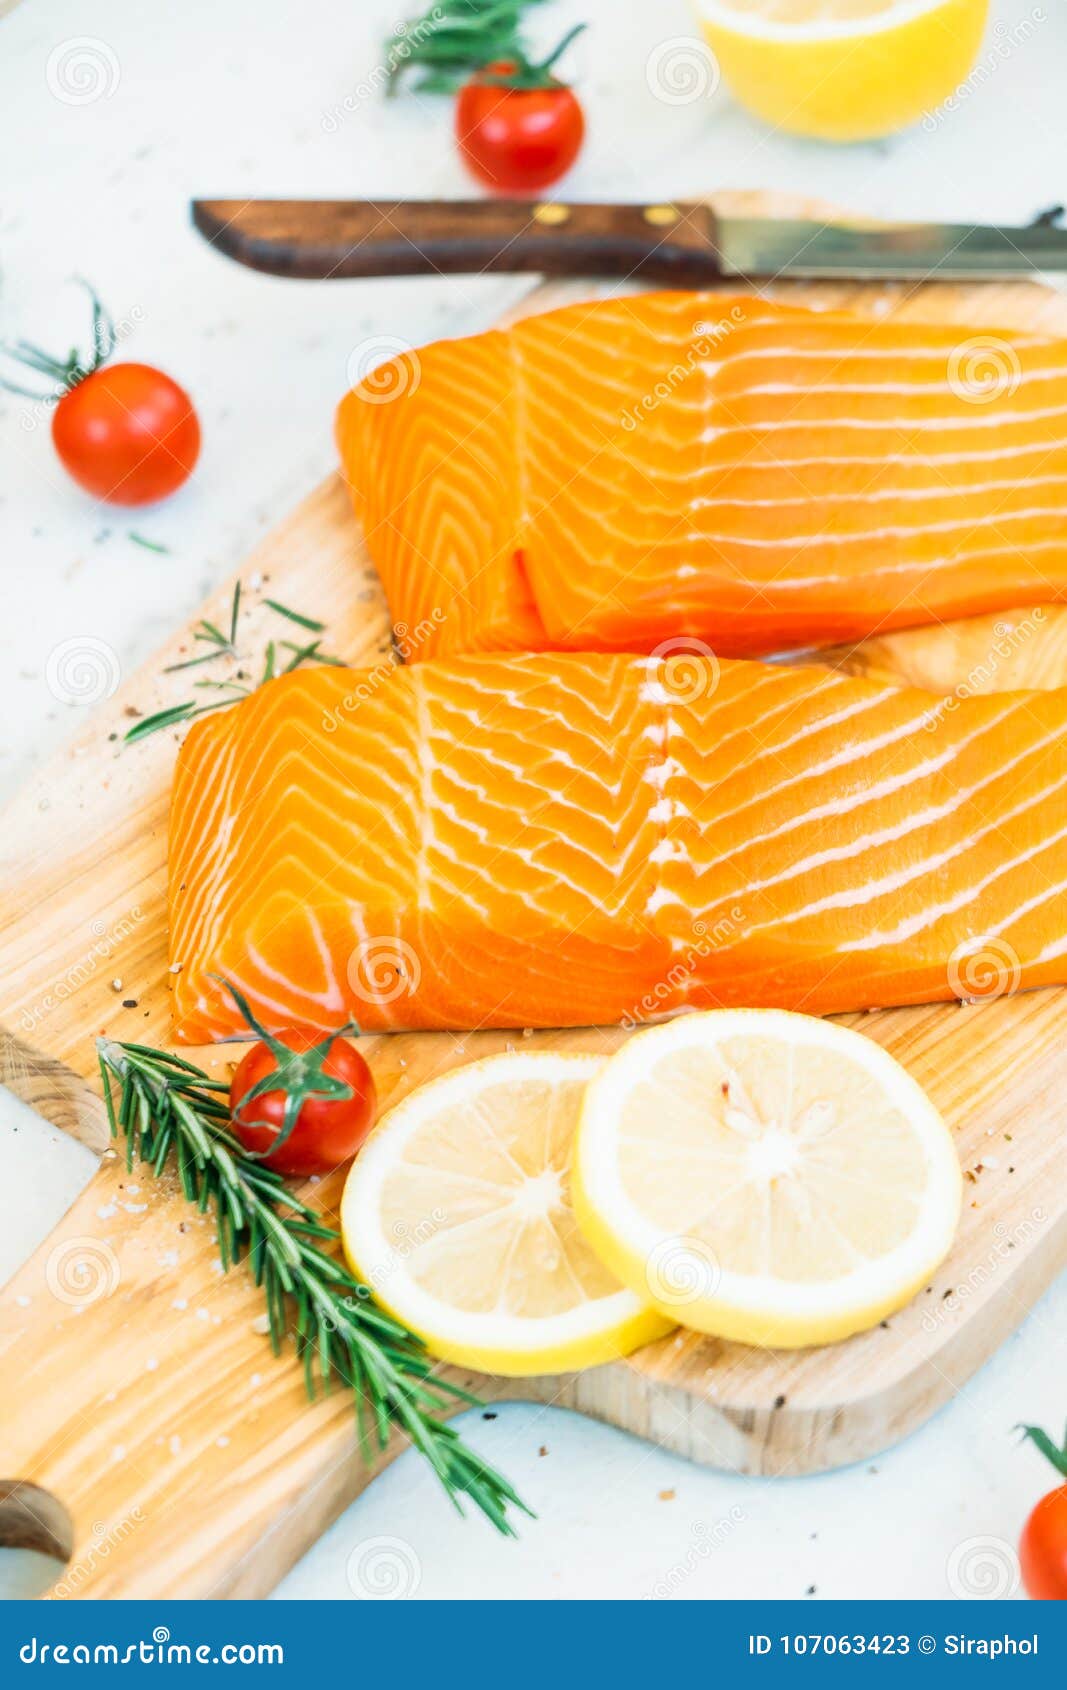 Raw and Fresh Salmon Meat Fillet on Wooden Cutting Board Stock Image ...